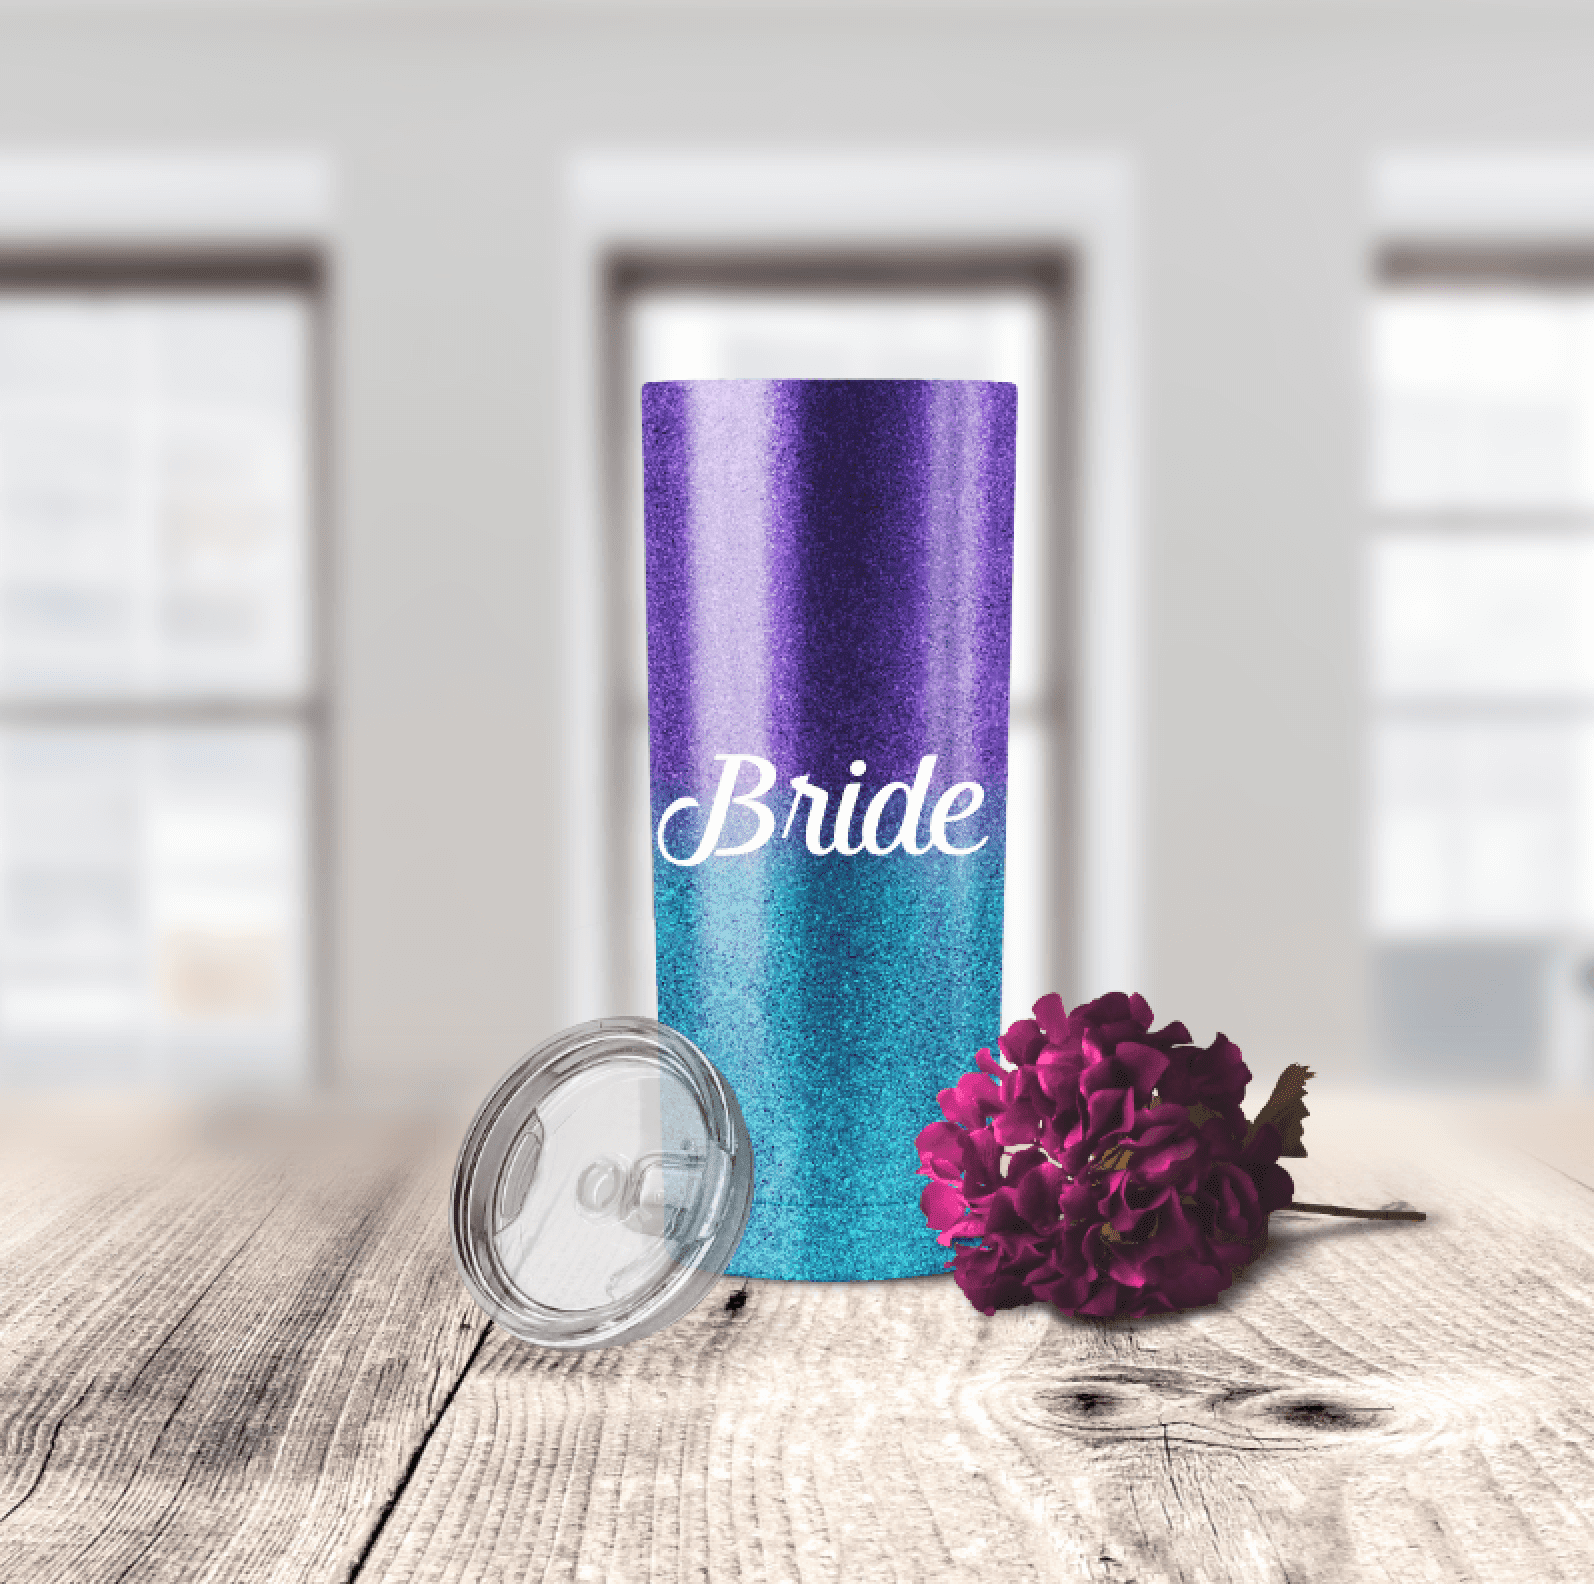 Download How To Make Drinkware Mockups In Silhouette Studio Plus Free Background Image Silhouette School